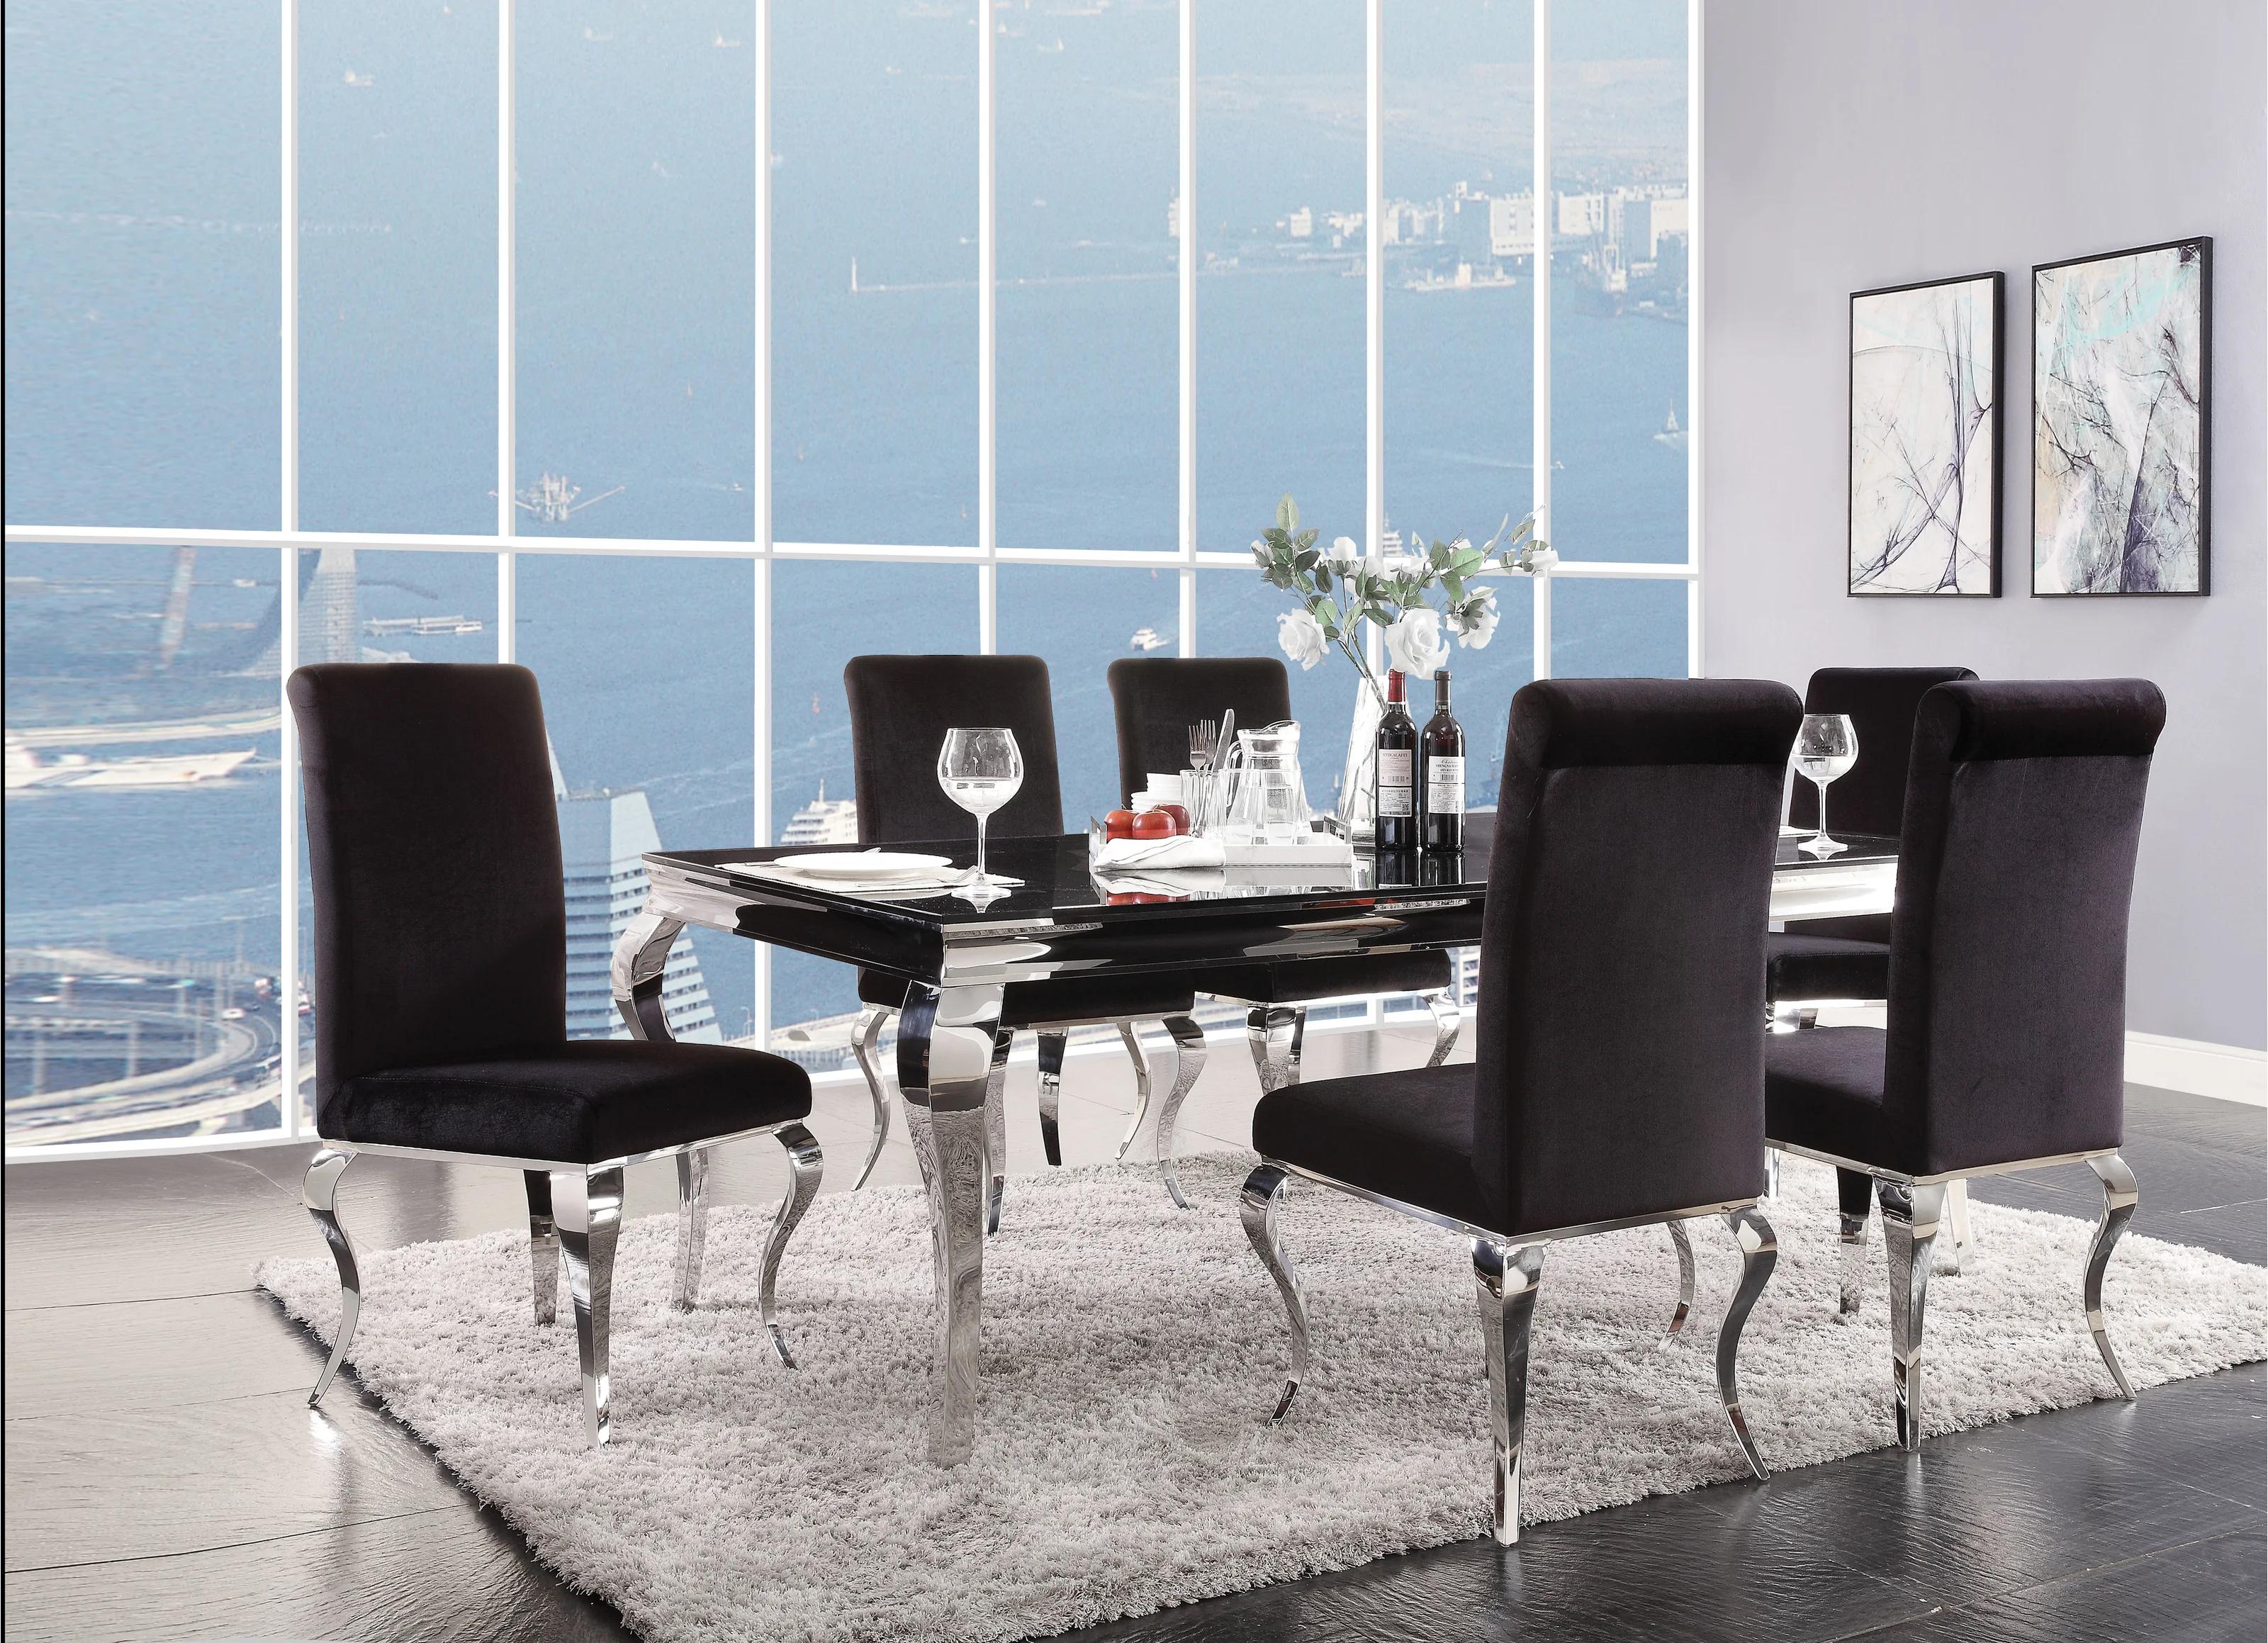 

    
Modern Steel & Black Dining Table + 6x Chairs by Acme Fabiola 62070-7pcs
